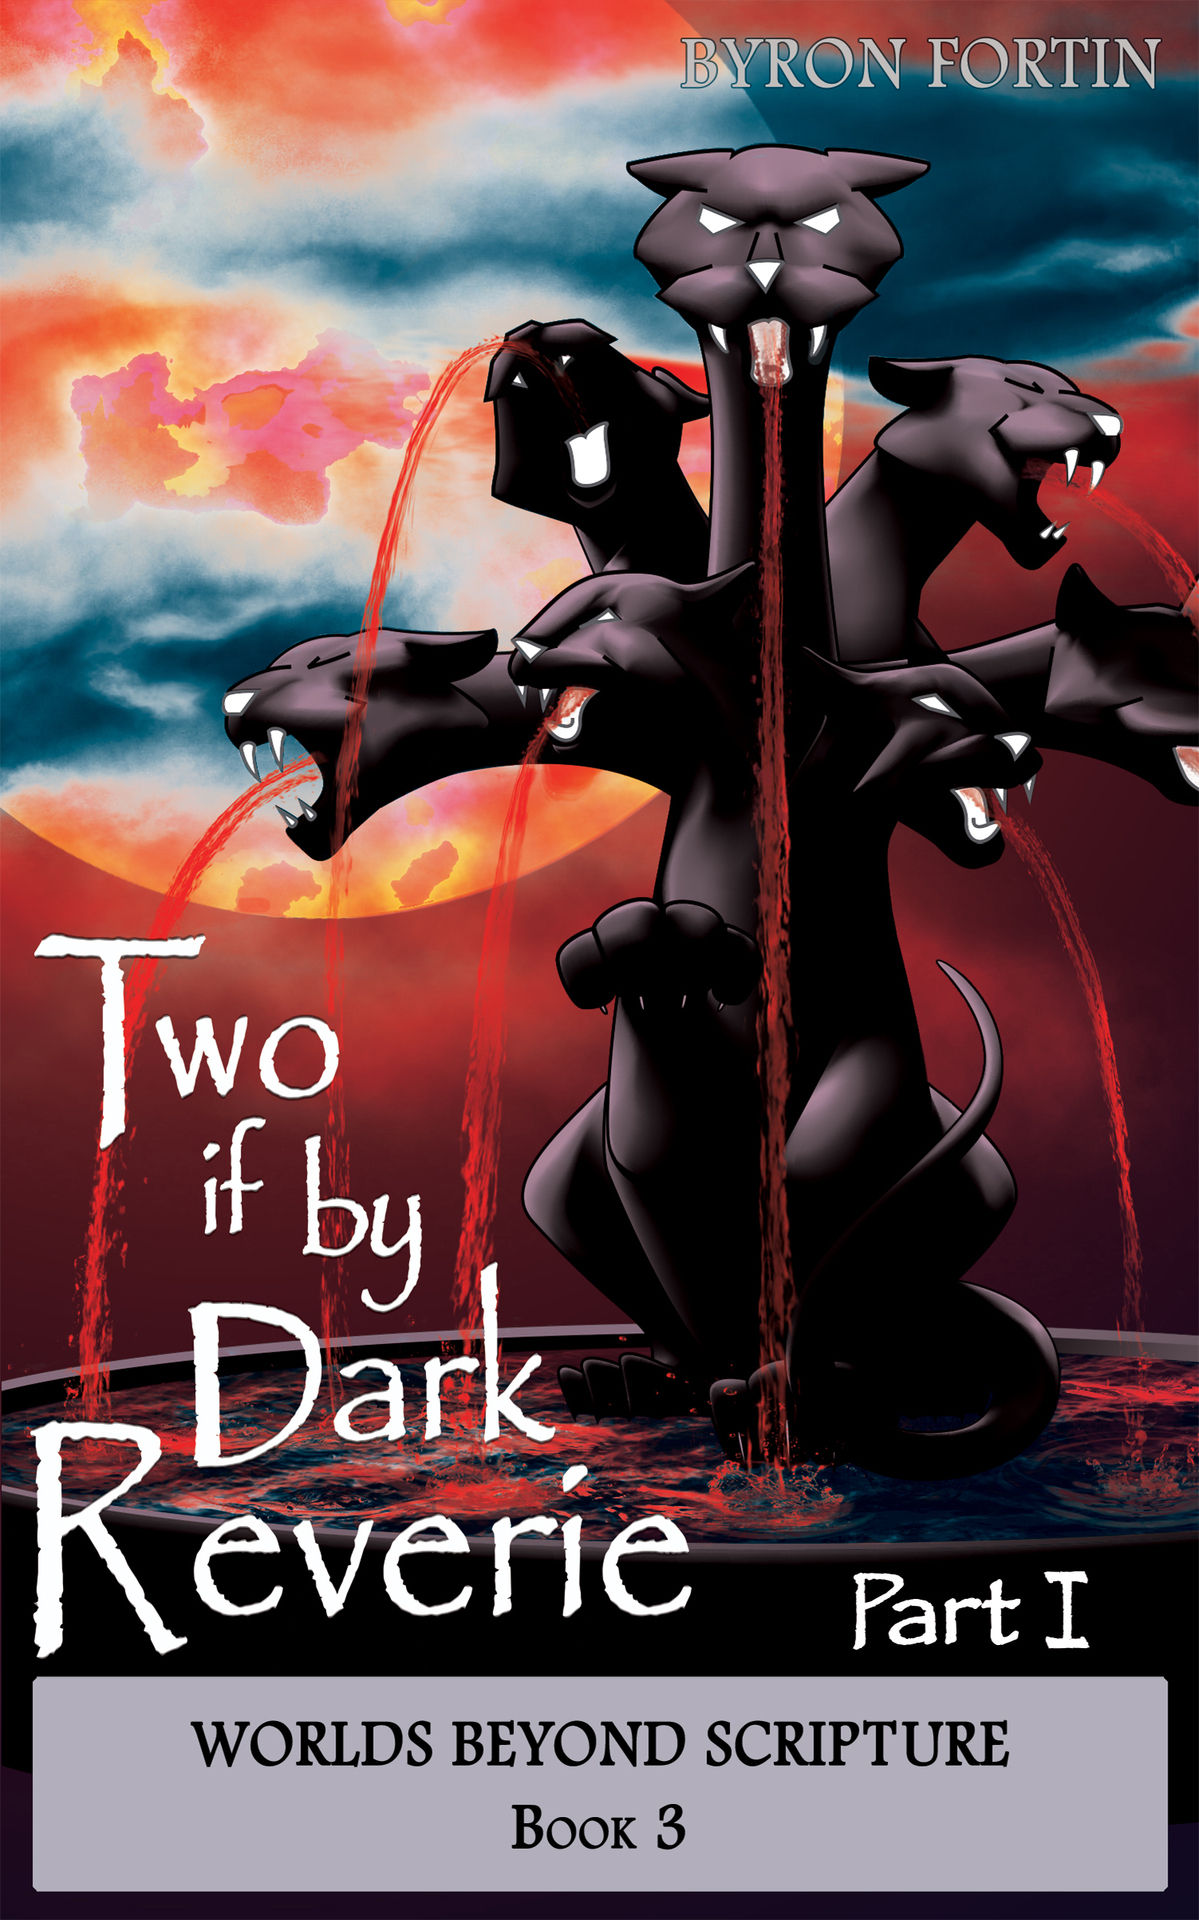 FREE: Two if by Dark Reverie: Part I by Byron Fortin